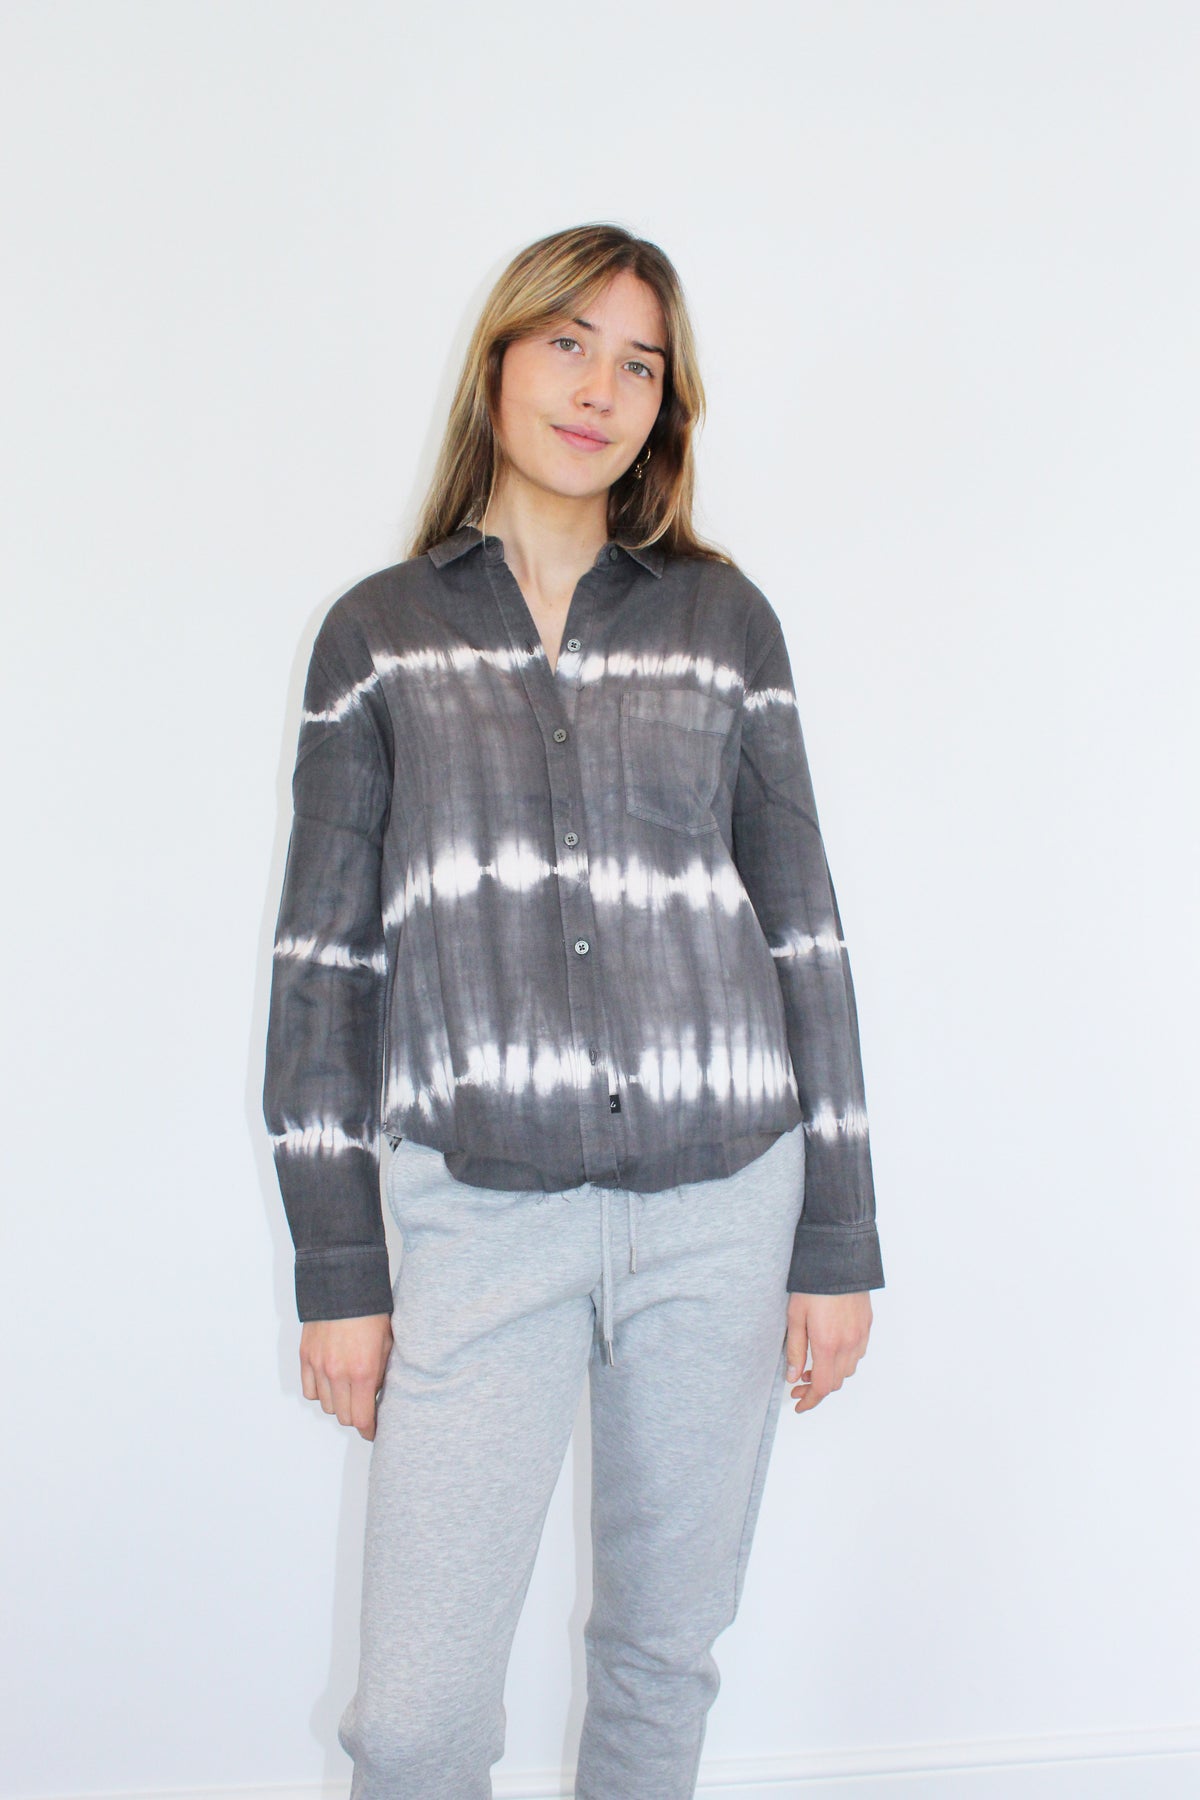 RAILS Ingrid Raw Shirt in Coal with White Waves